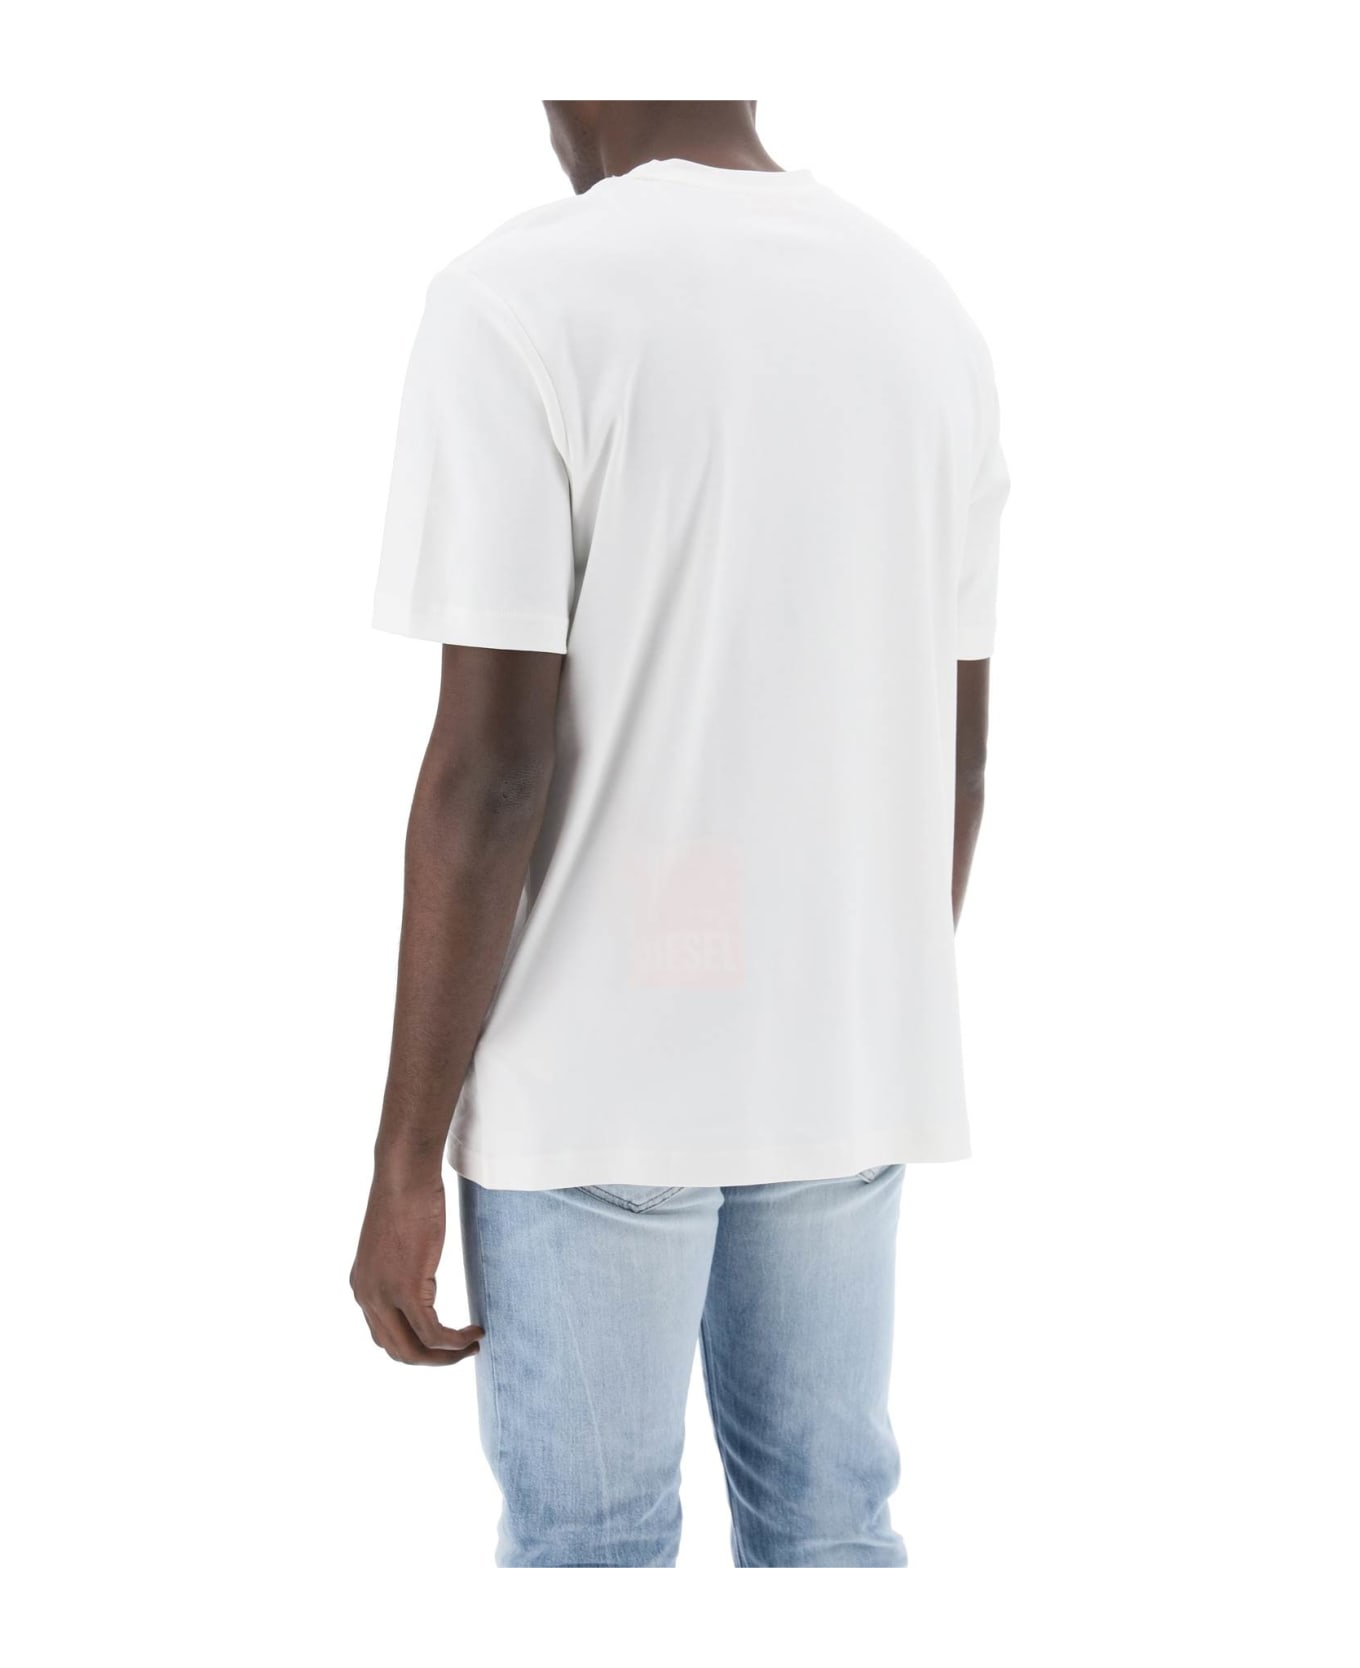 Diesel 't-just-doval-pj' T-shirt - Off/white Tシャツ